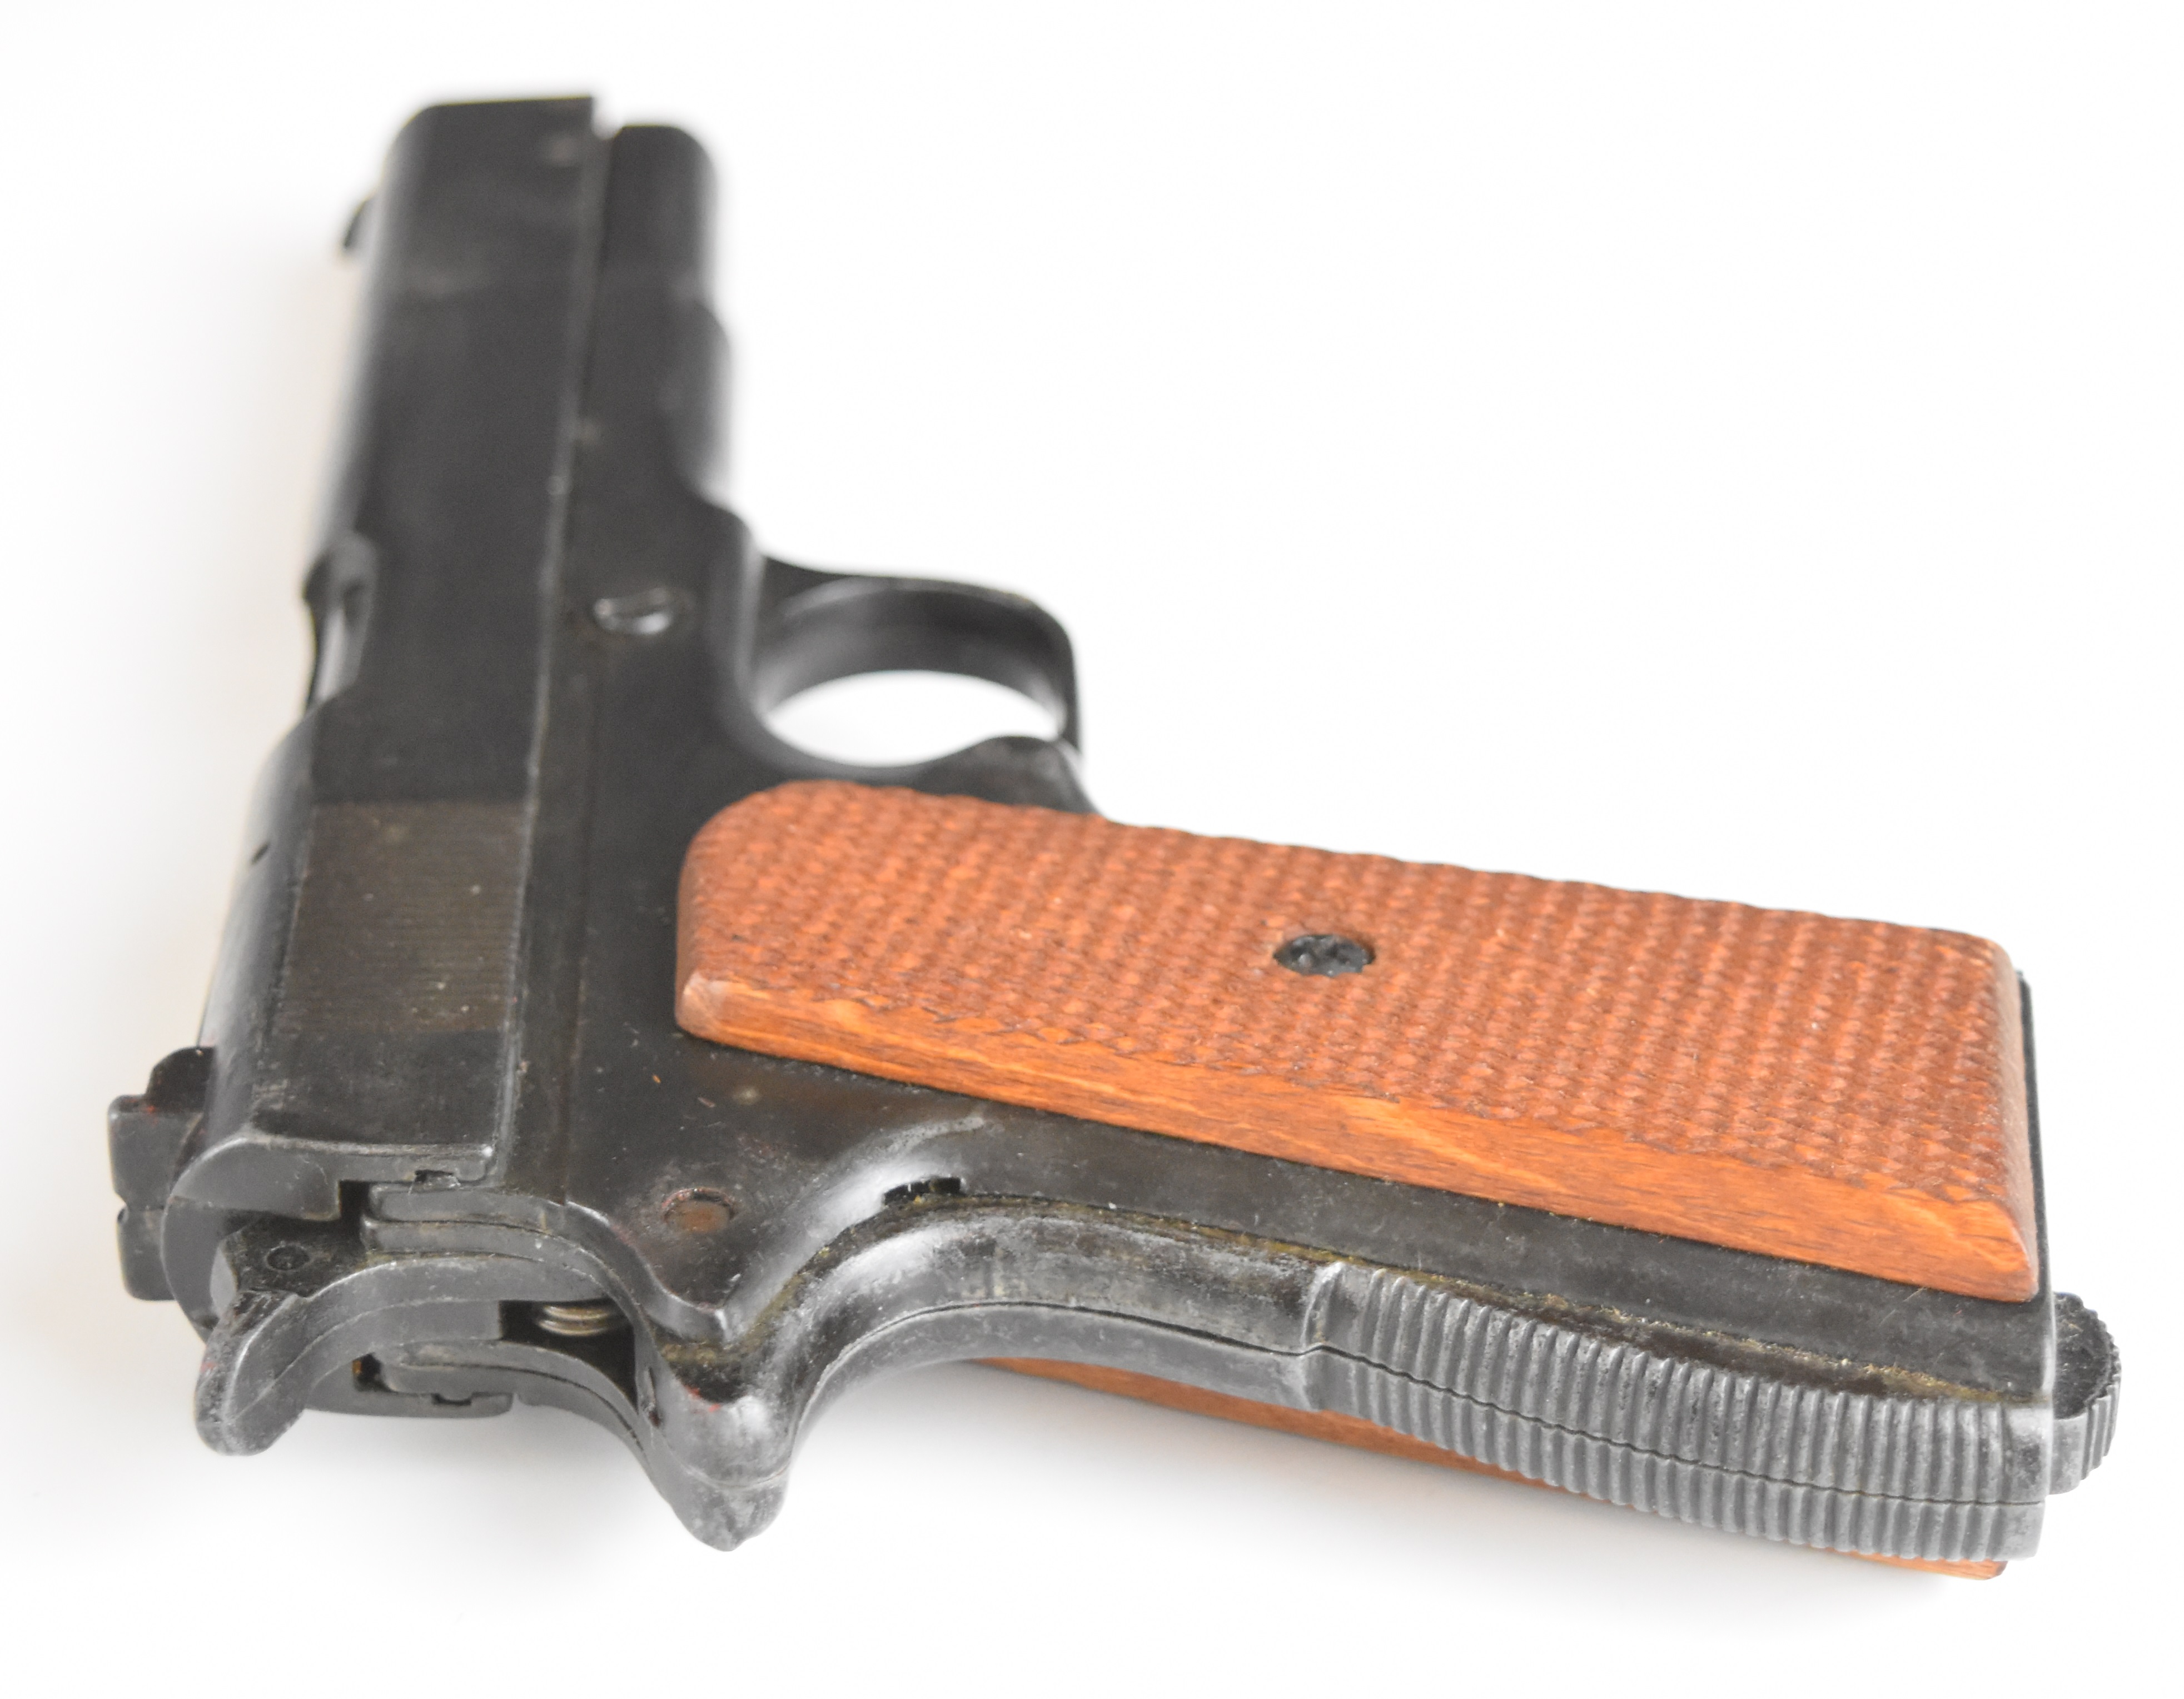 BBM Bruni 8mm blank firing pistol with chequered wooden grips, in original fitted box. - Image 4 of 14